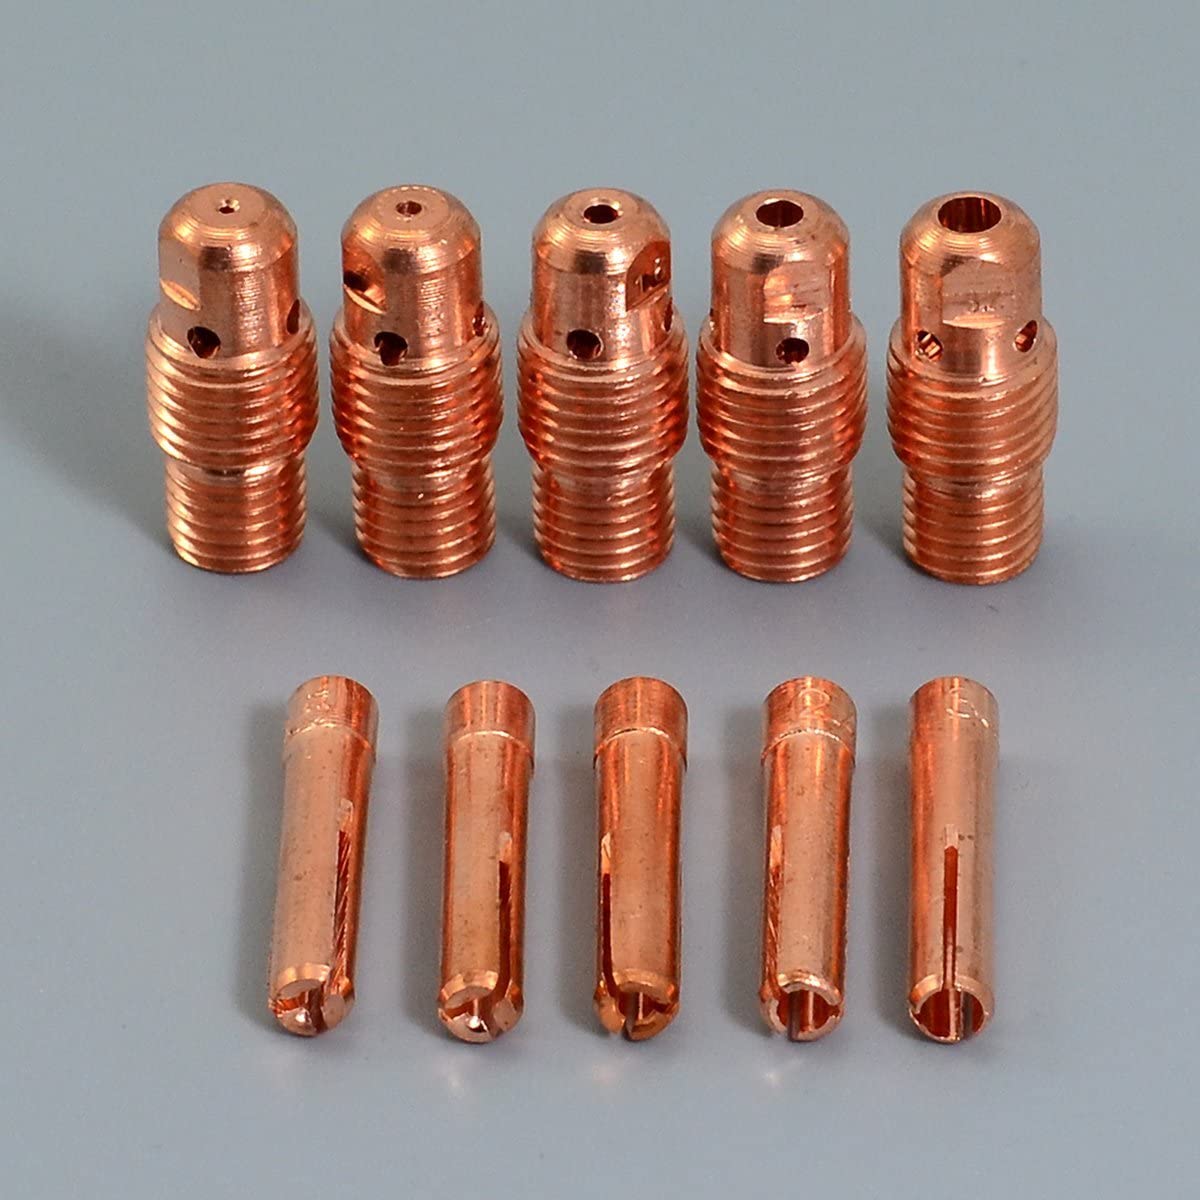 4246Pcs-TIG-Gas-Lens-Collet-Body-Assorted-Size-Kit-Fit-SR-WP-9-20-25-TIG-Welding-Torch-Accessories-1927685-5